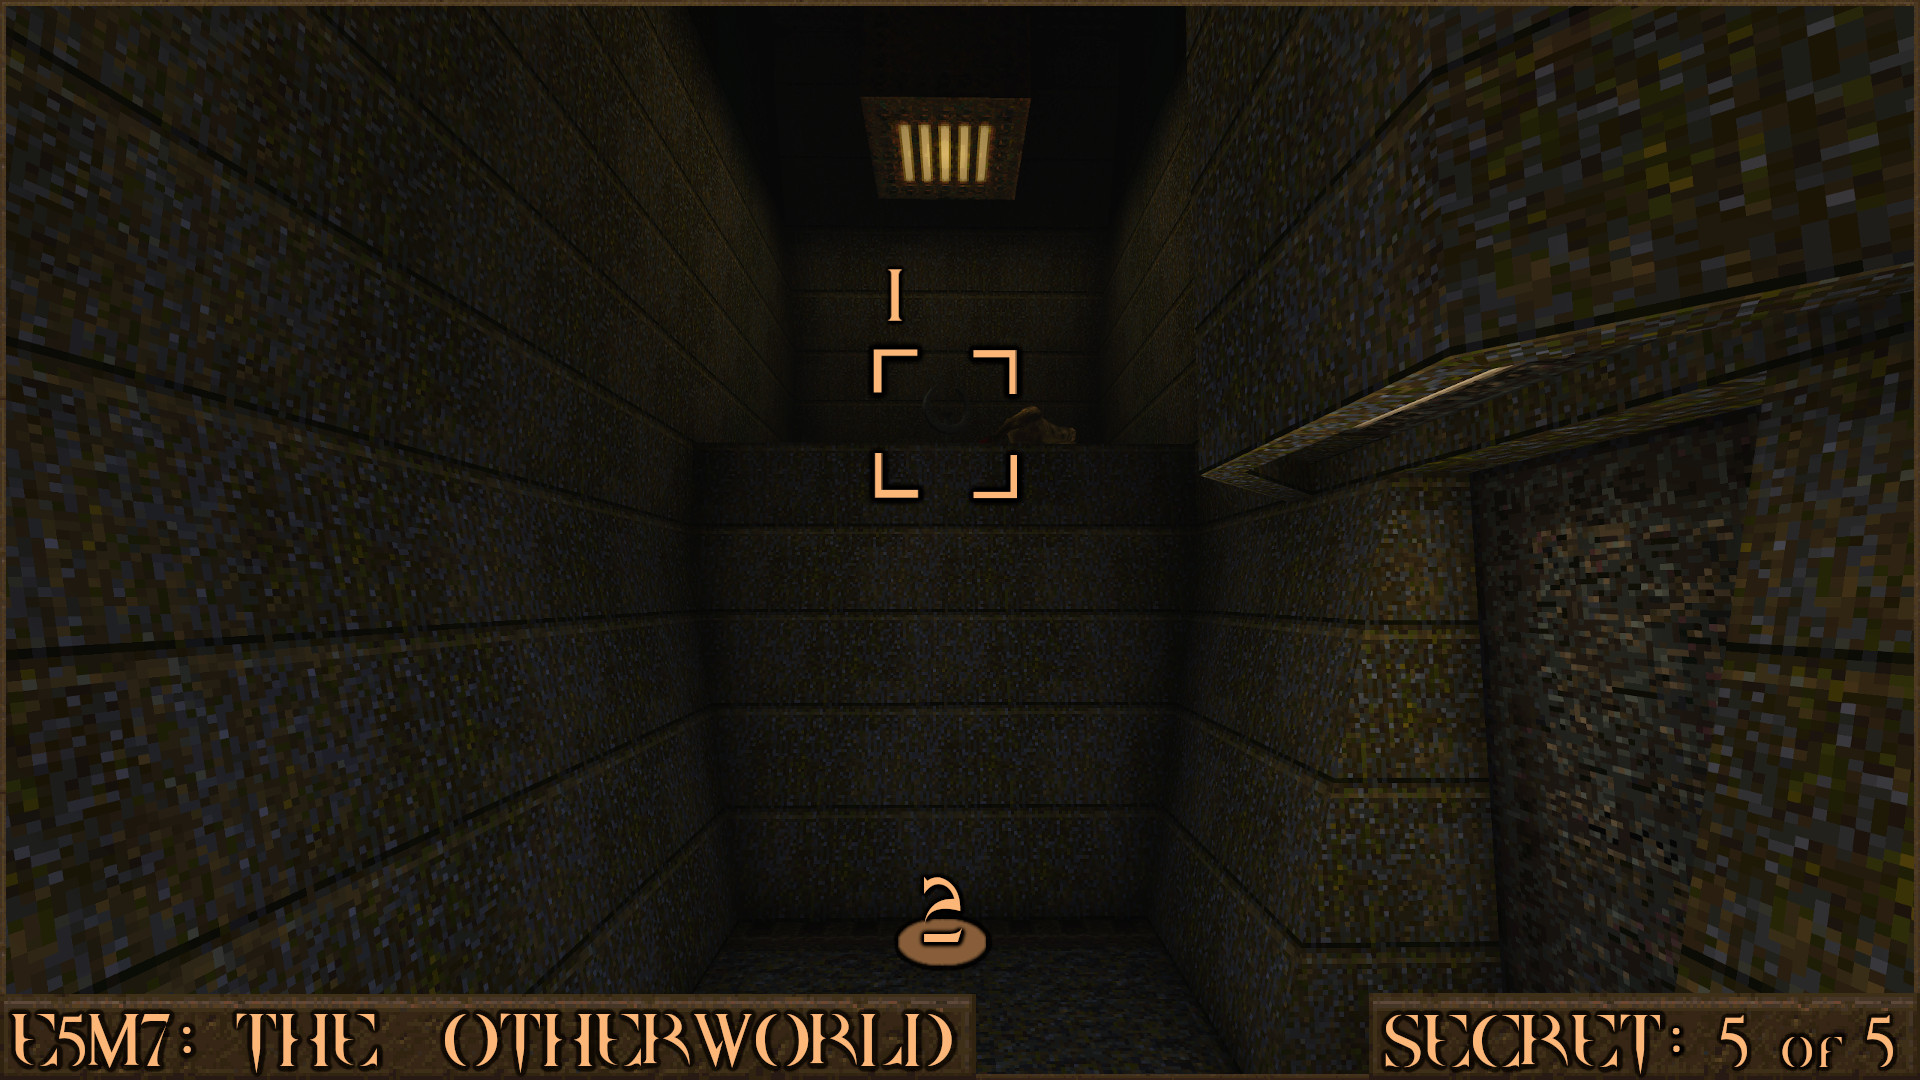 Quake Finding All Secrets in Quake Expansion pack: Dimension of the Past - E5M7: The Otherworld - 2B50986